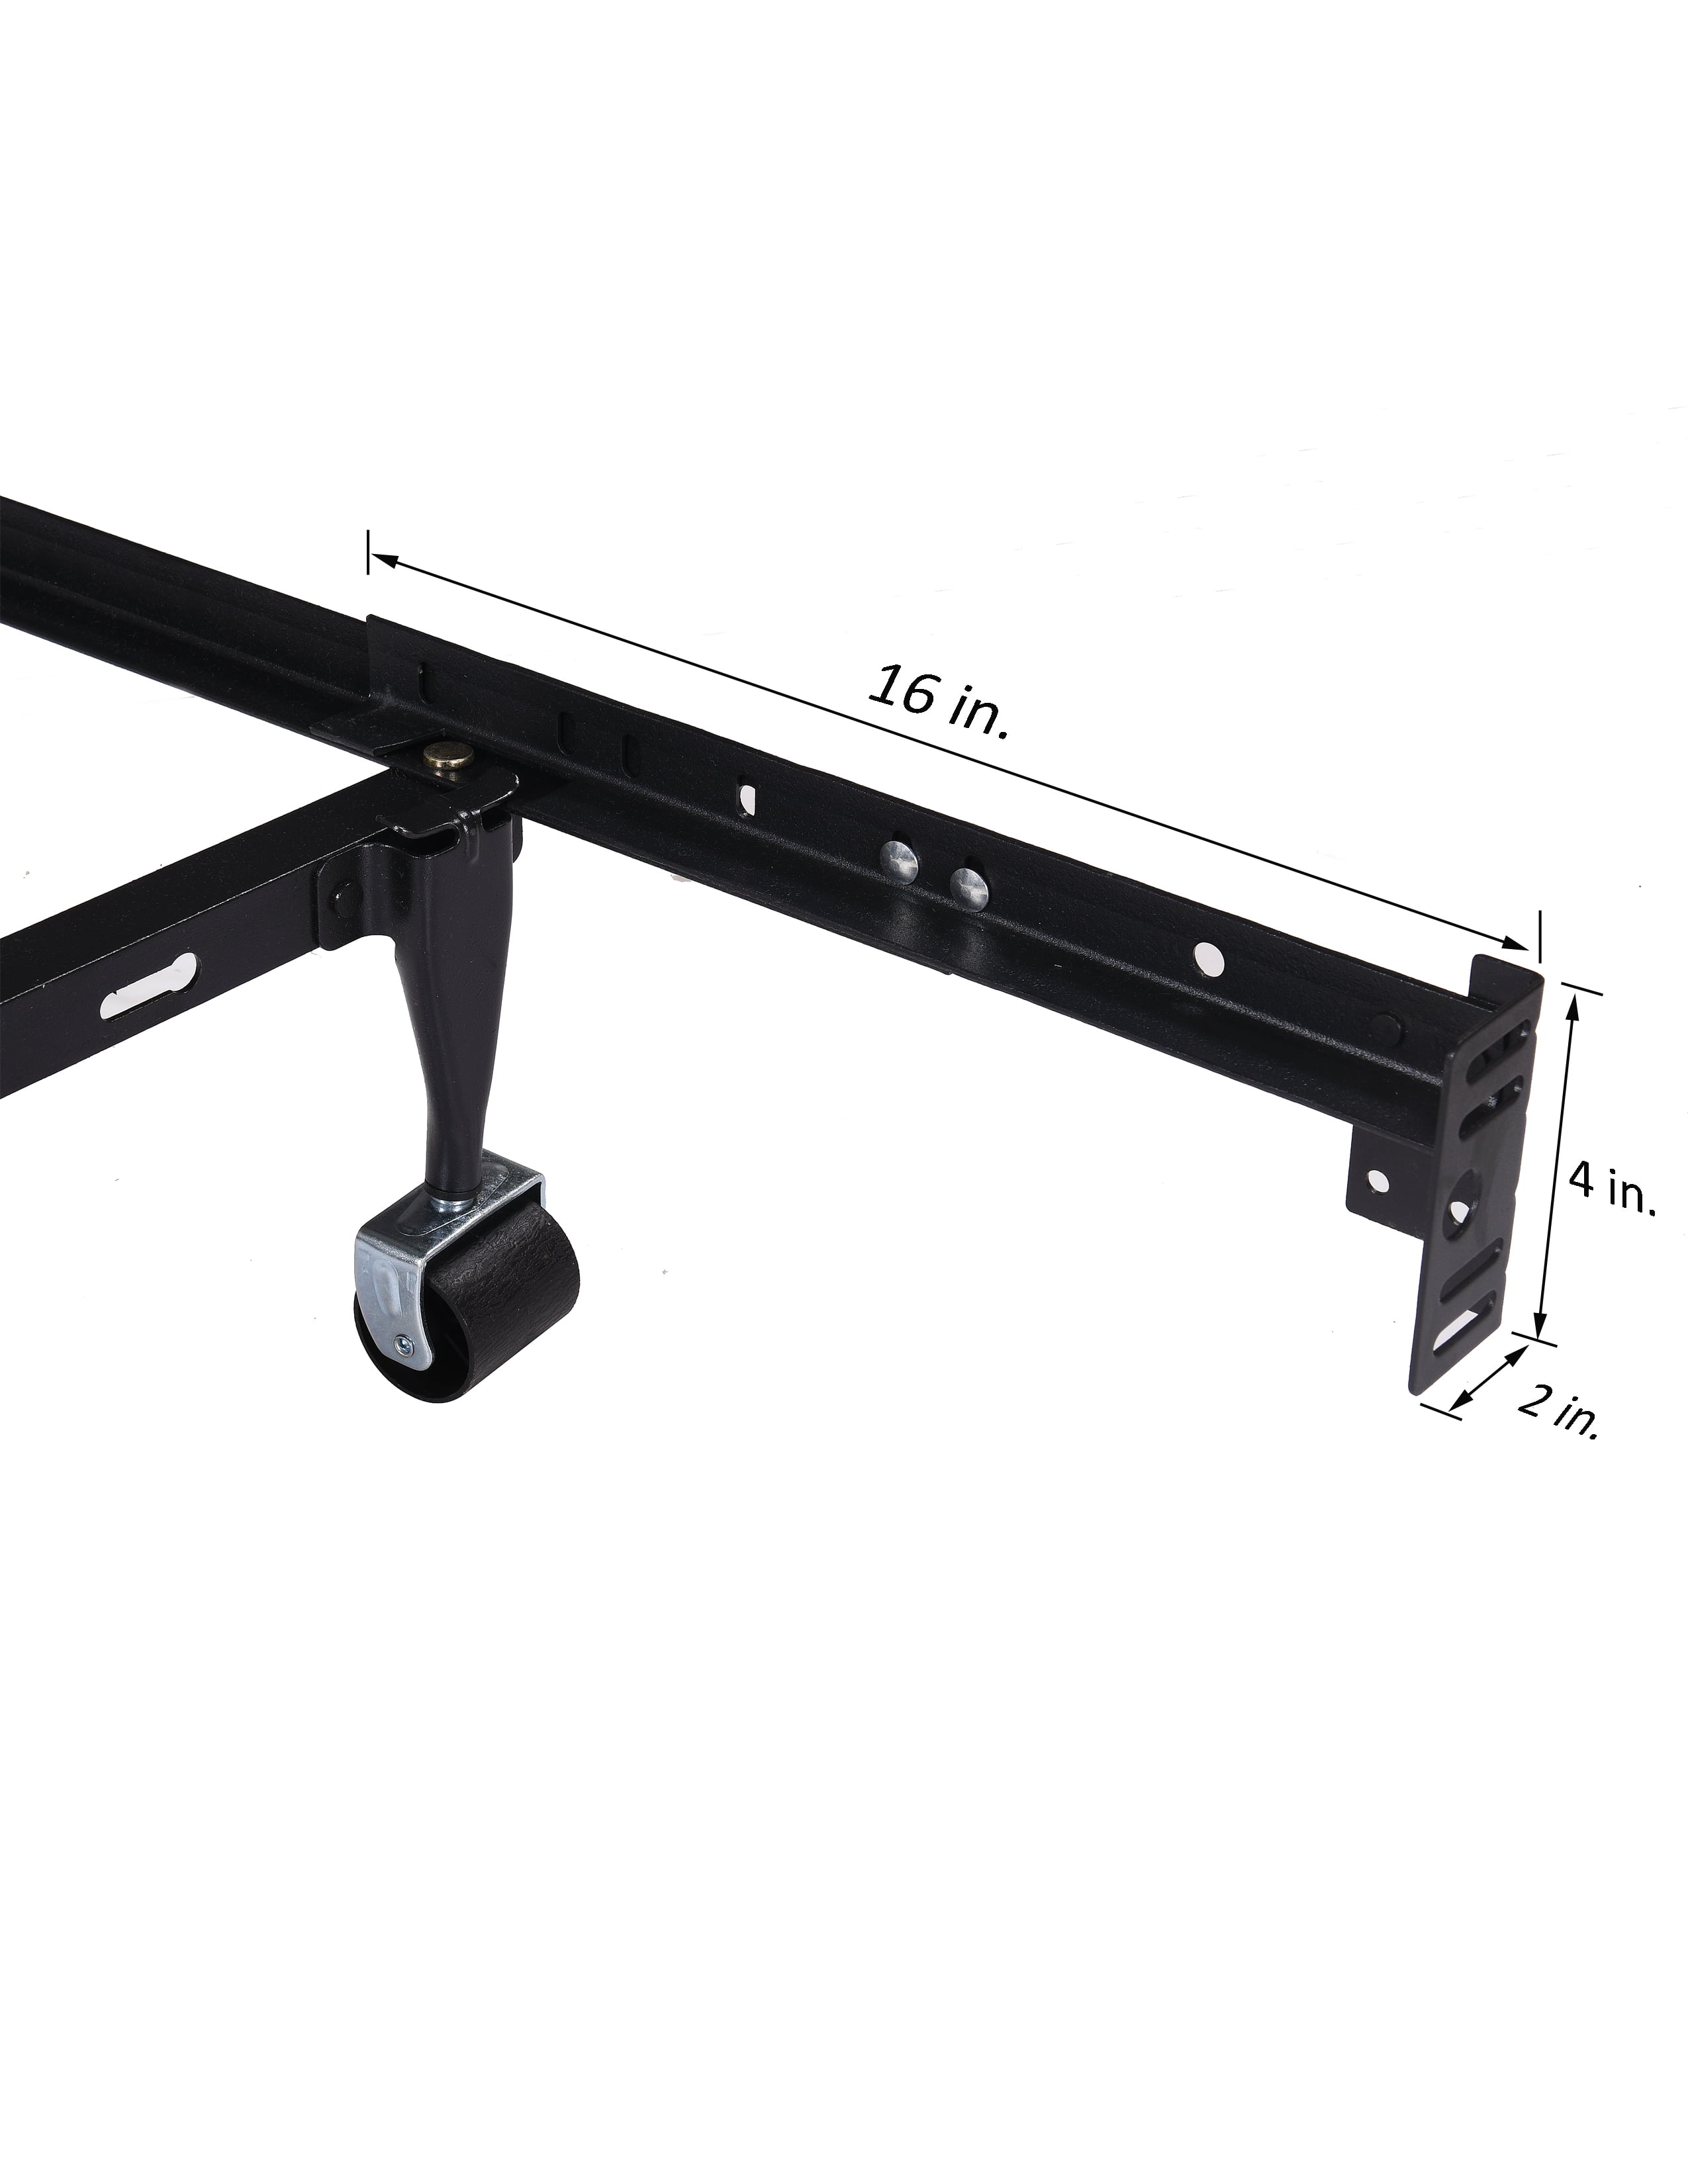 Details about   Footboard Extension Bracket & Headboard Attachment Bracket For Queen-size 